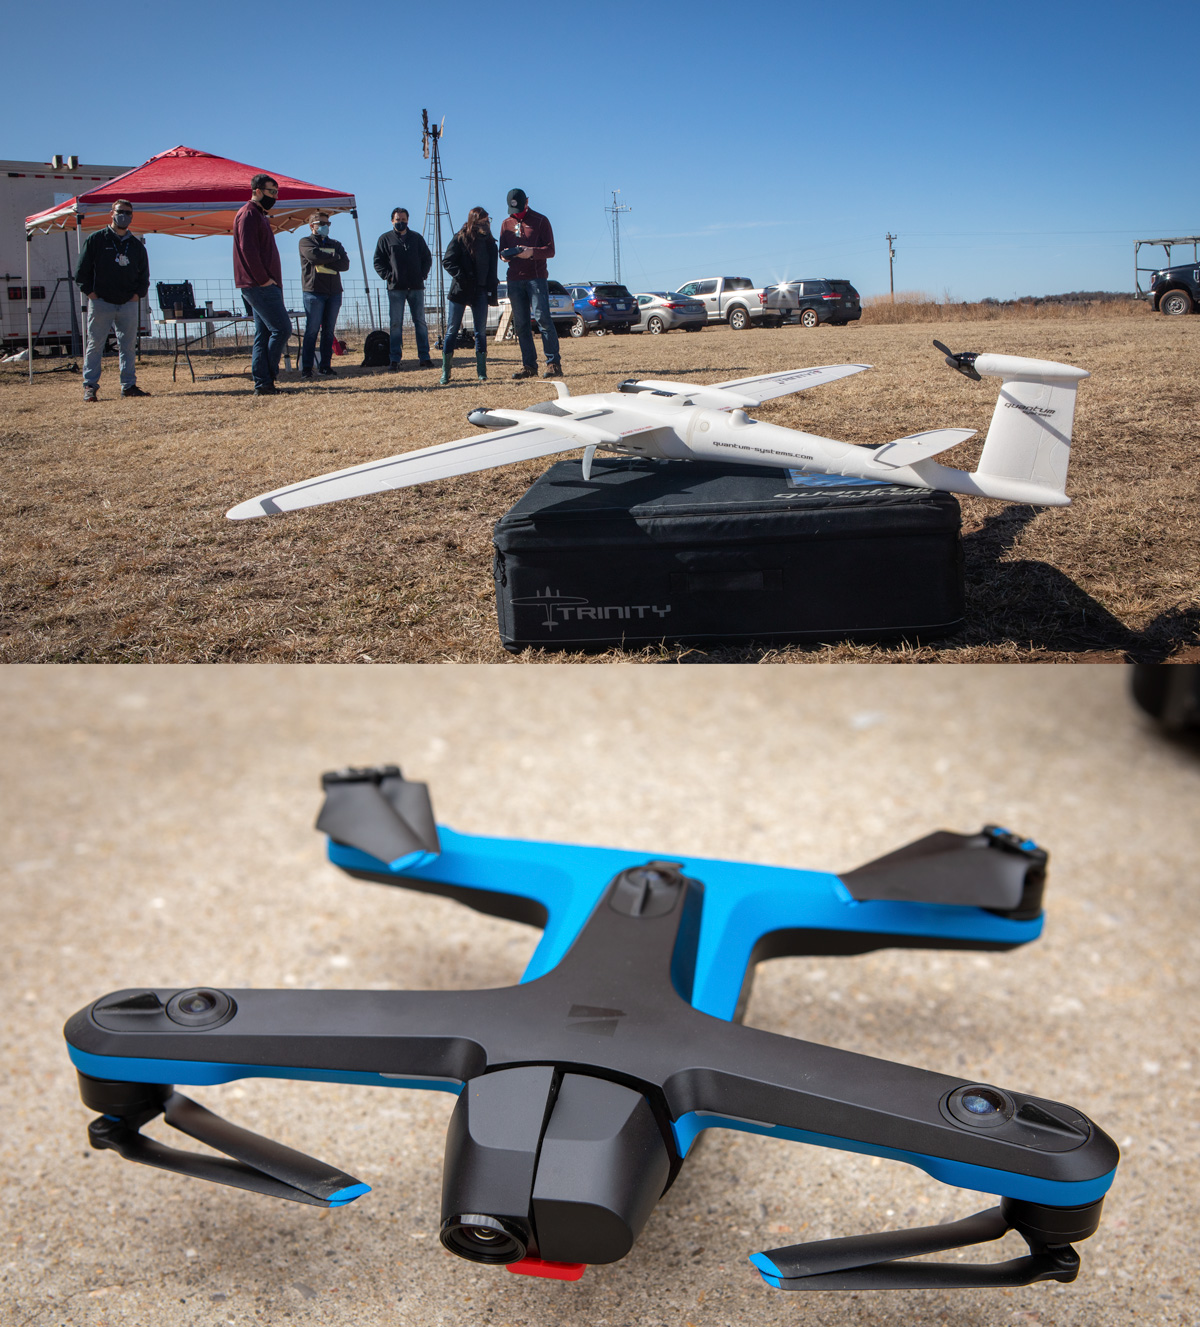 Top image: winged UAV in a field with researchers nearby. Bottom image: quadcopter style UAV on a tabletop